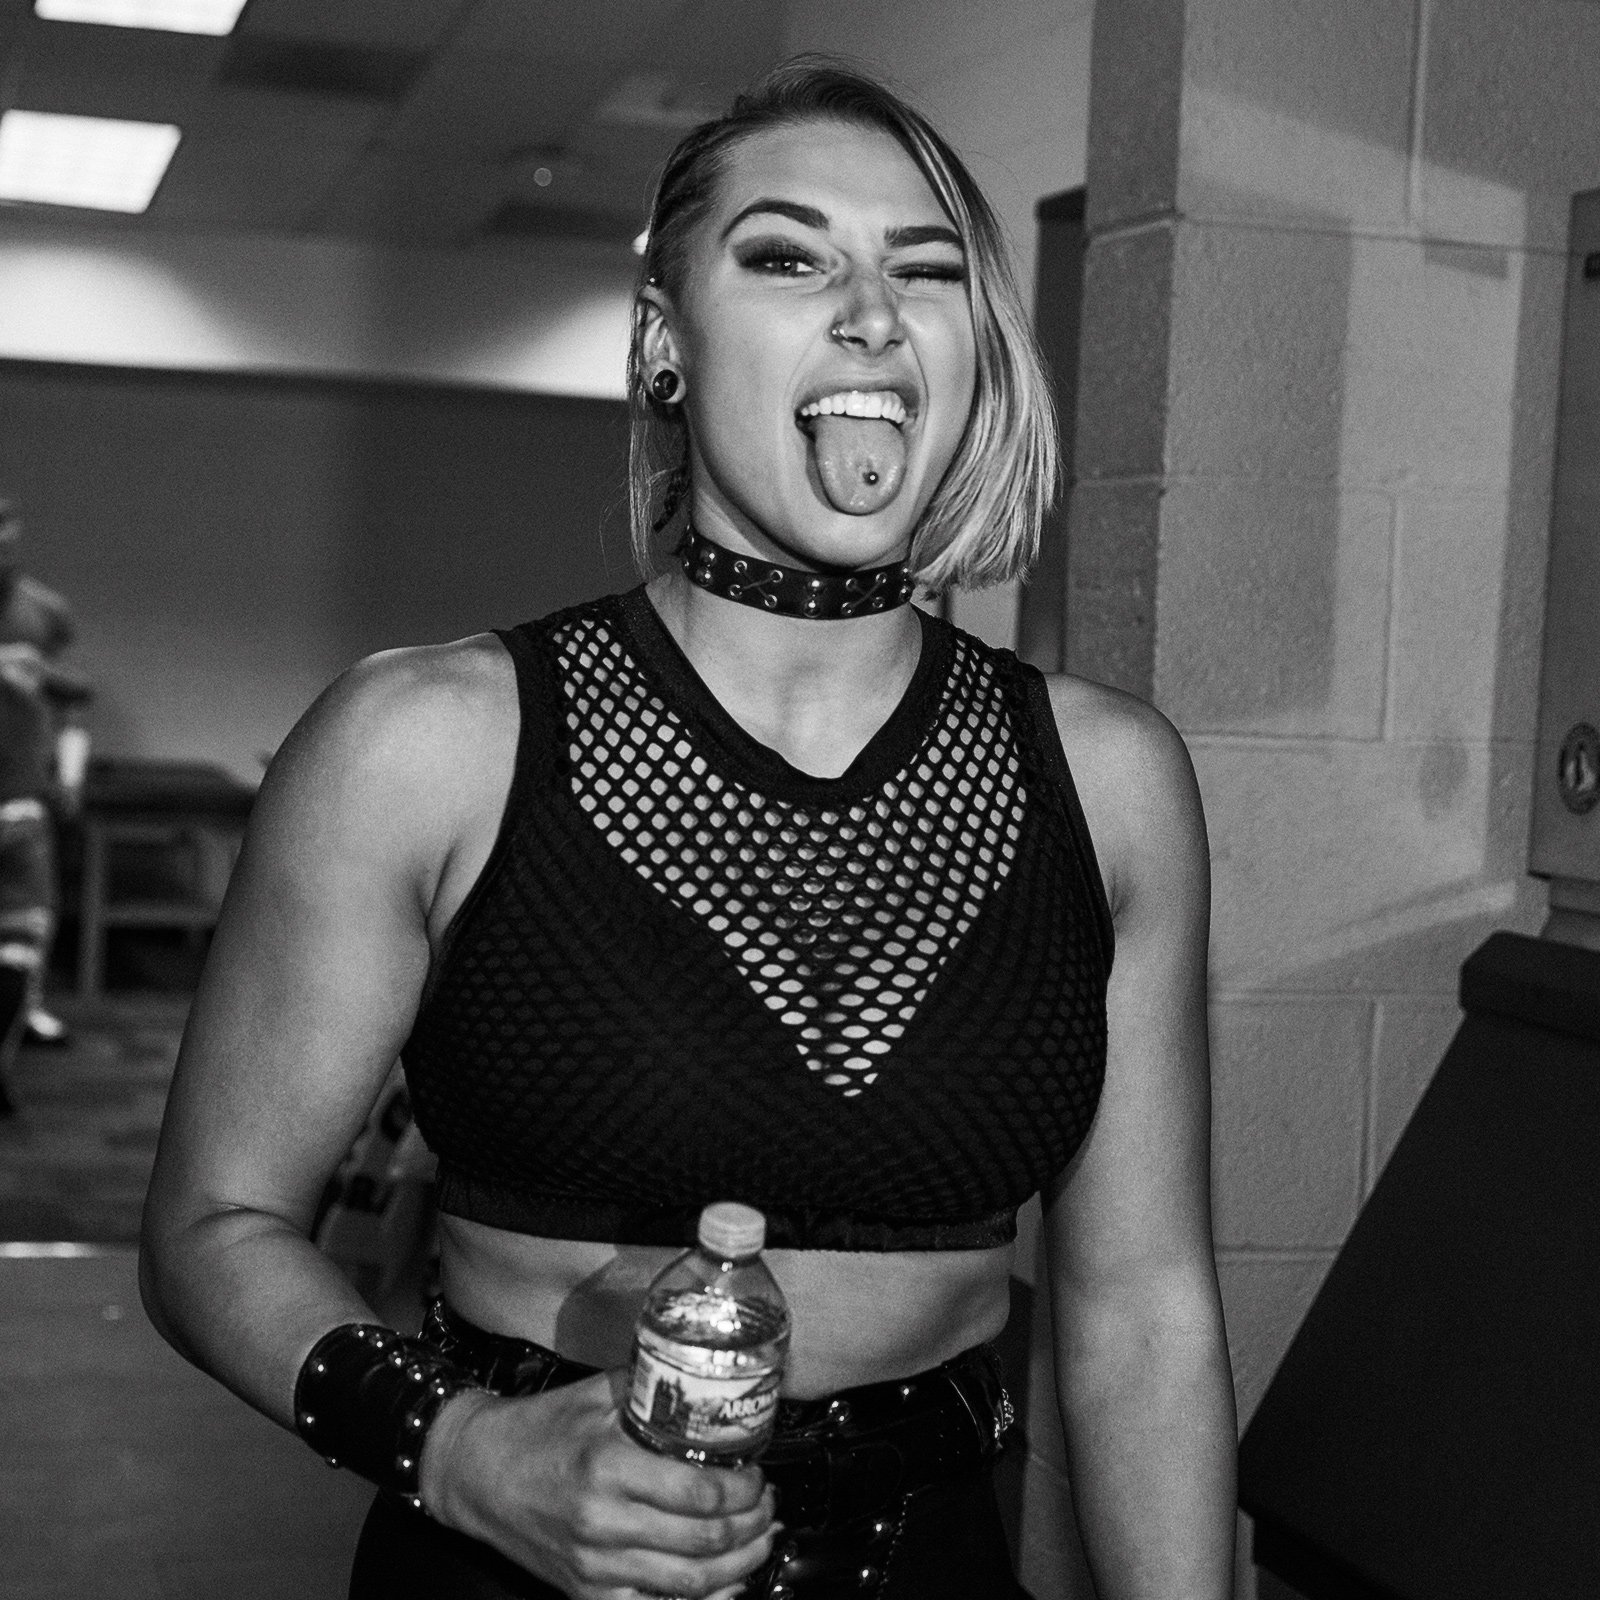 Her real name is Demi Bennett but we are going to... rhea ripley. 